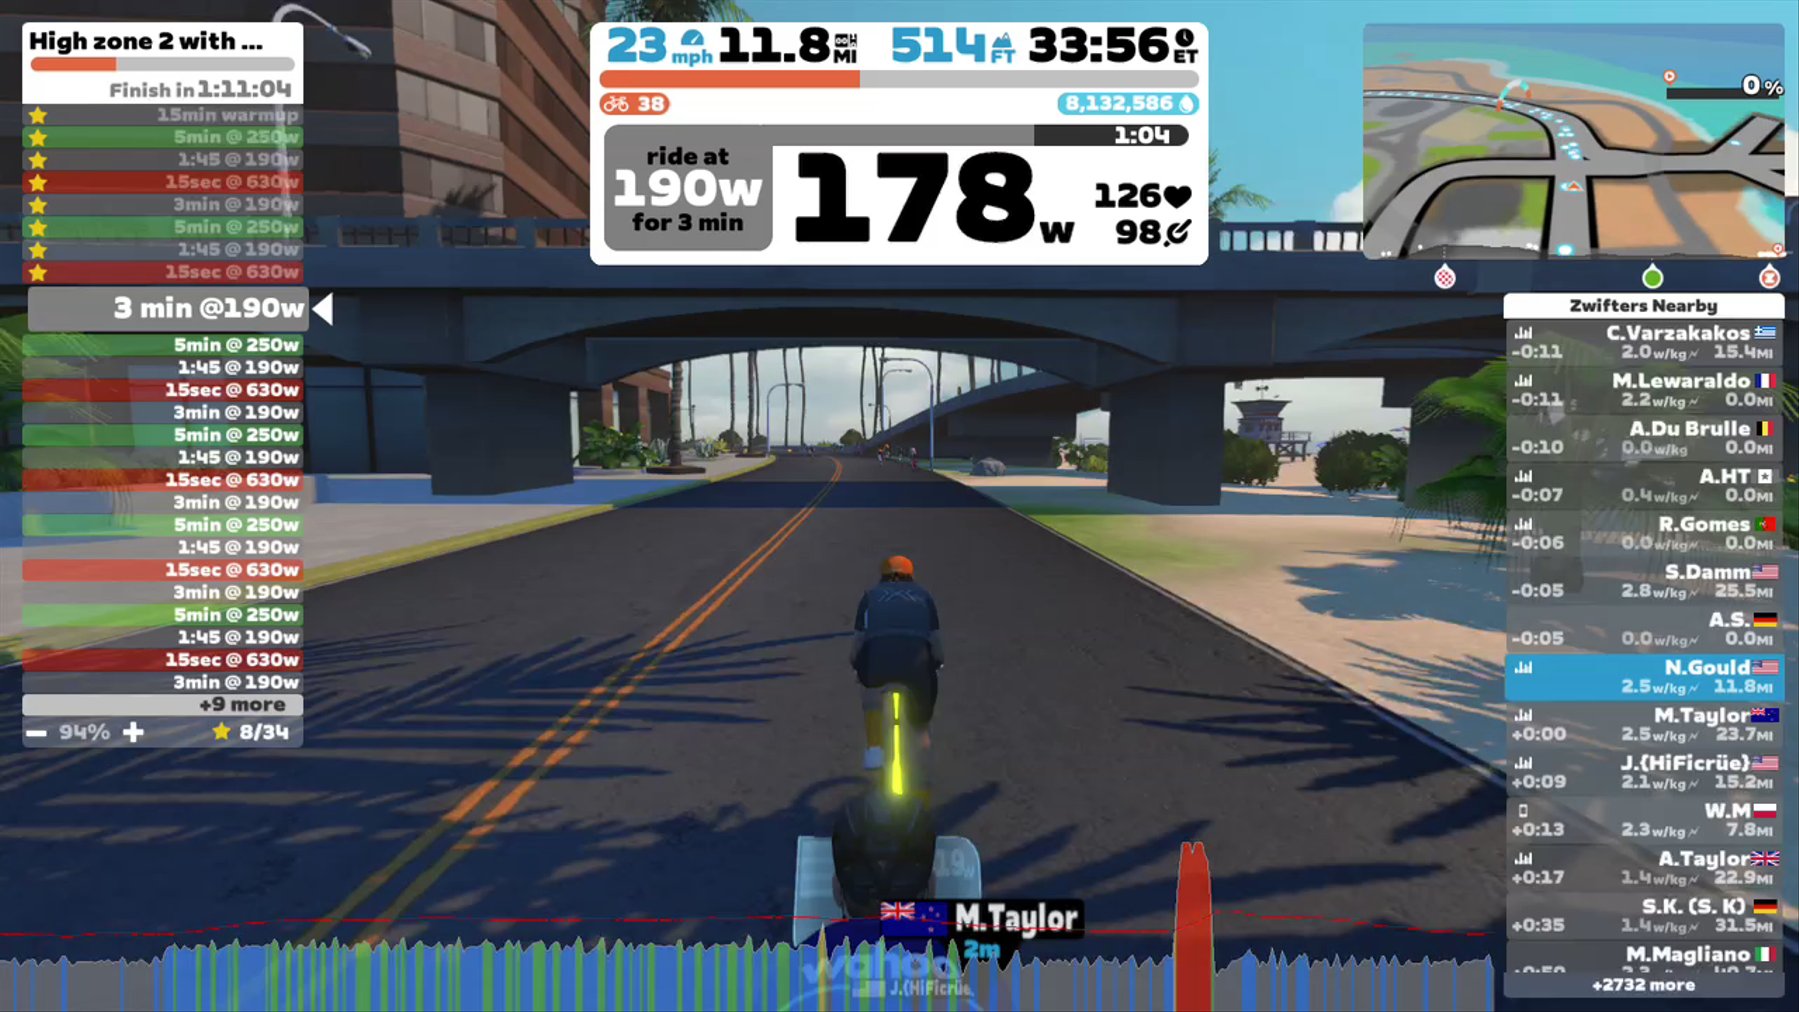 Zwift - High zone 2 with A-lactic sprints 8 x 15 sec in Watopia